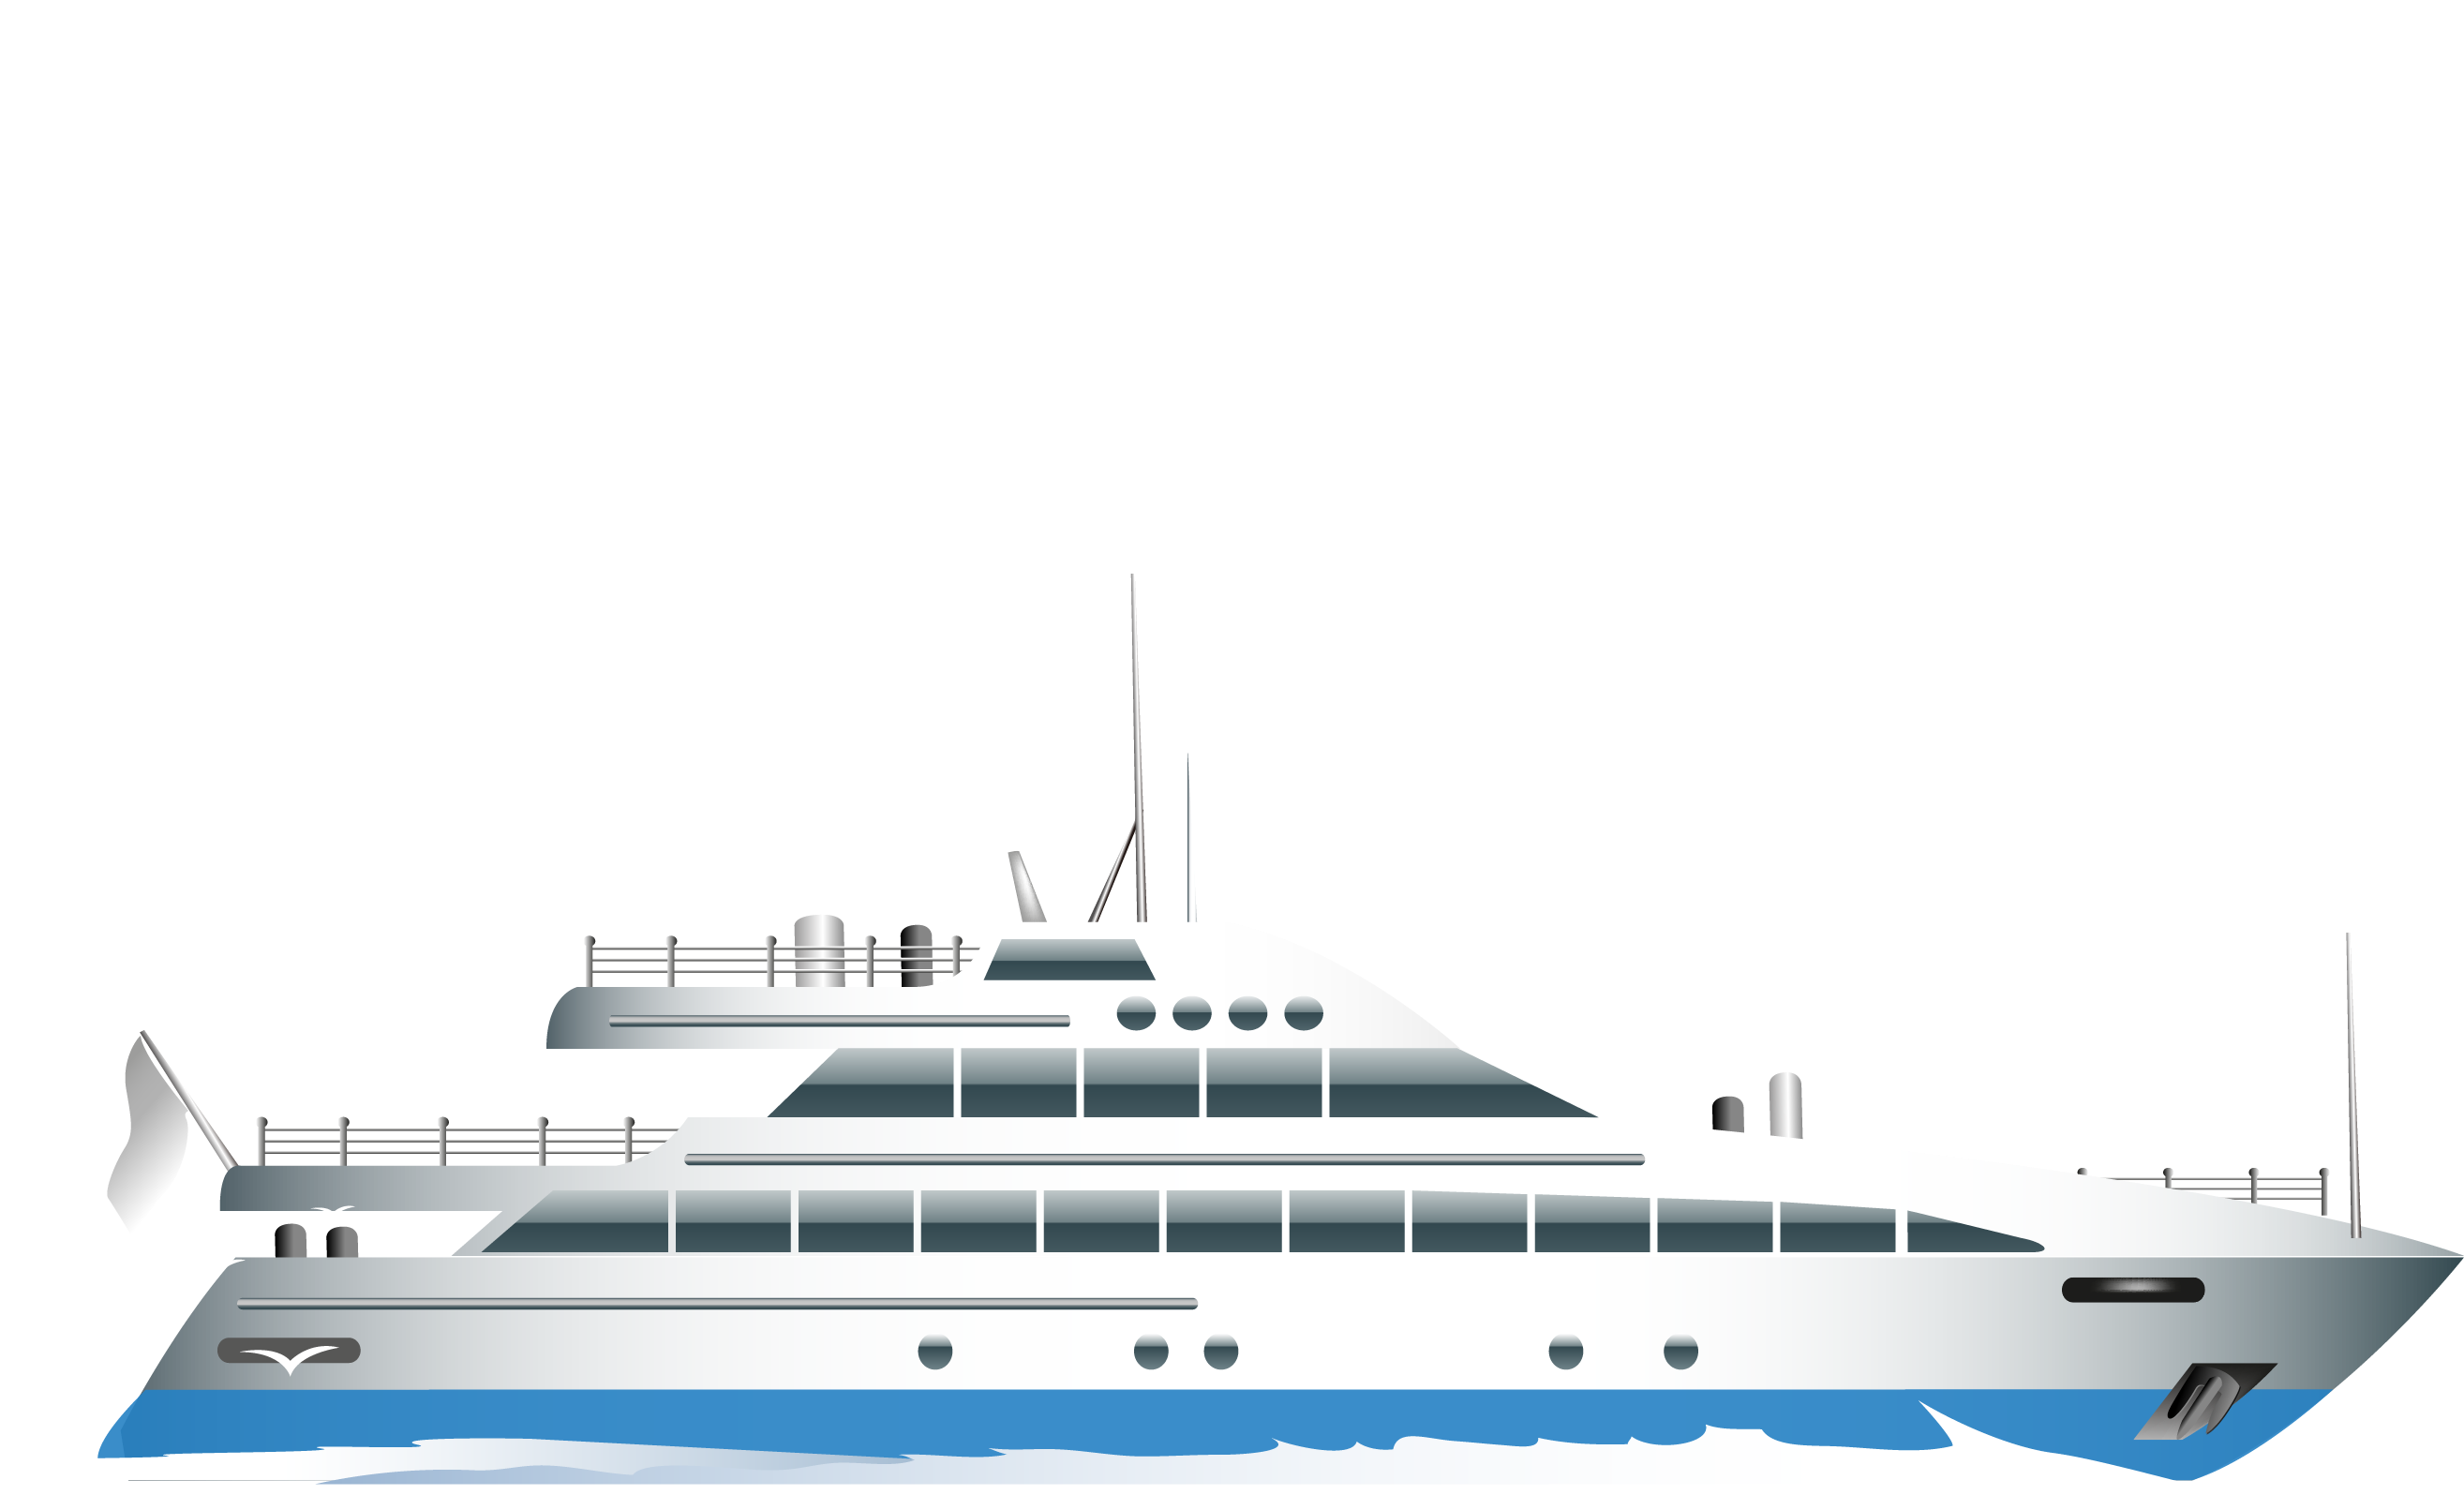 Yacht Transparent Image Ships Images In Png Mode